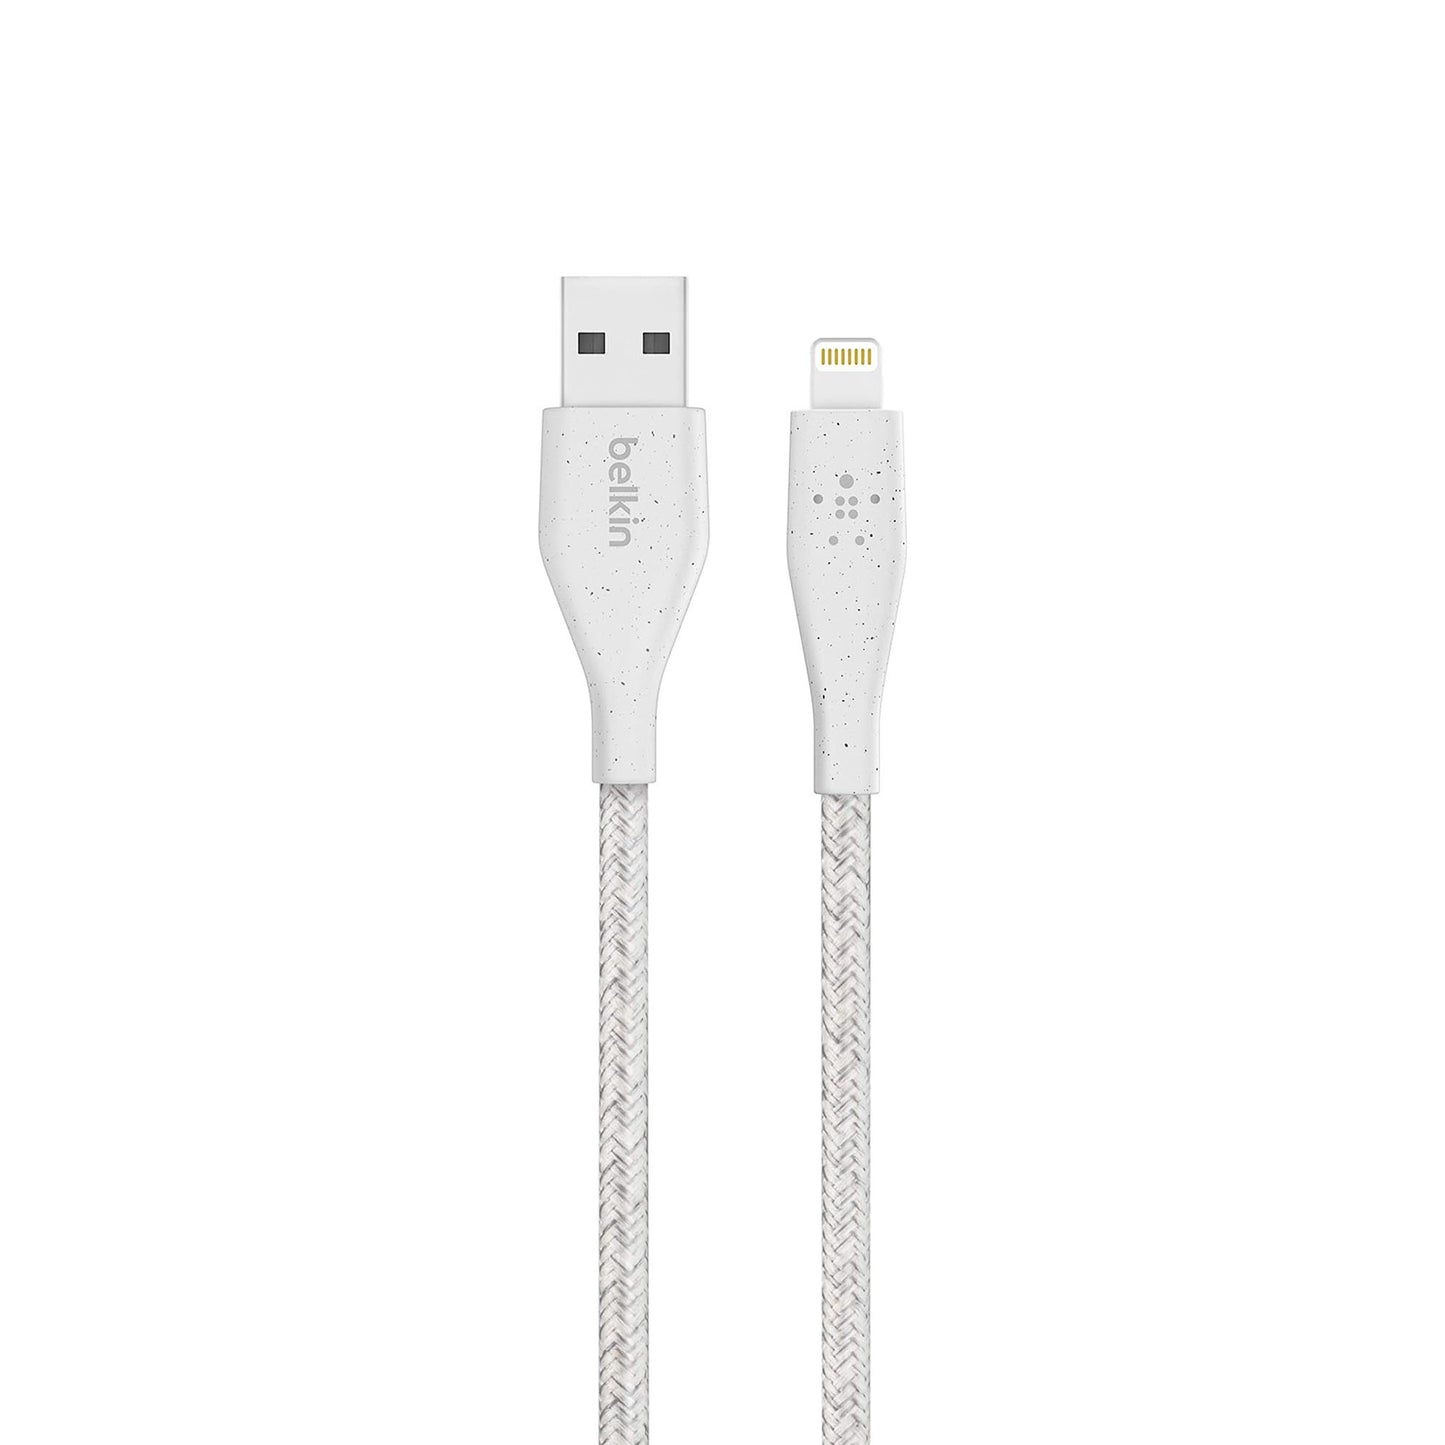 BELKIN Duratek Plus Lightning to USB-A Cable with Strap 10ft - White